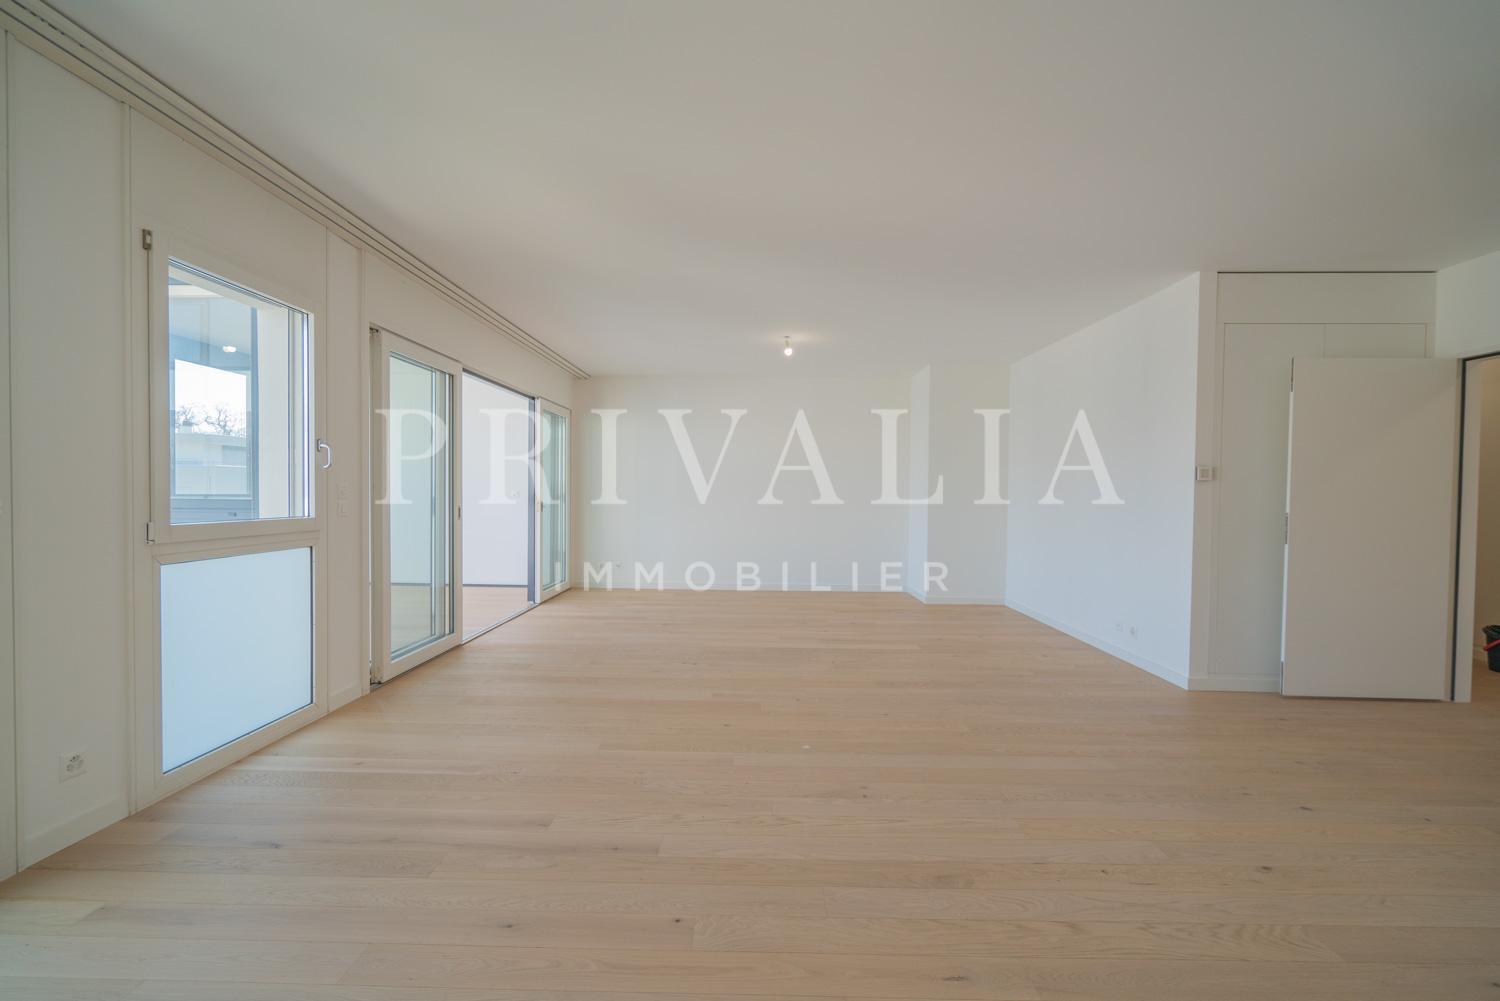 PrivaliaBeautiful 7.5 room flat on the 1st floor with 2 balconies in a secure residence